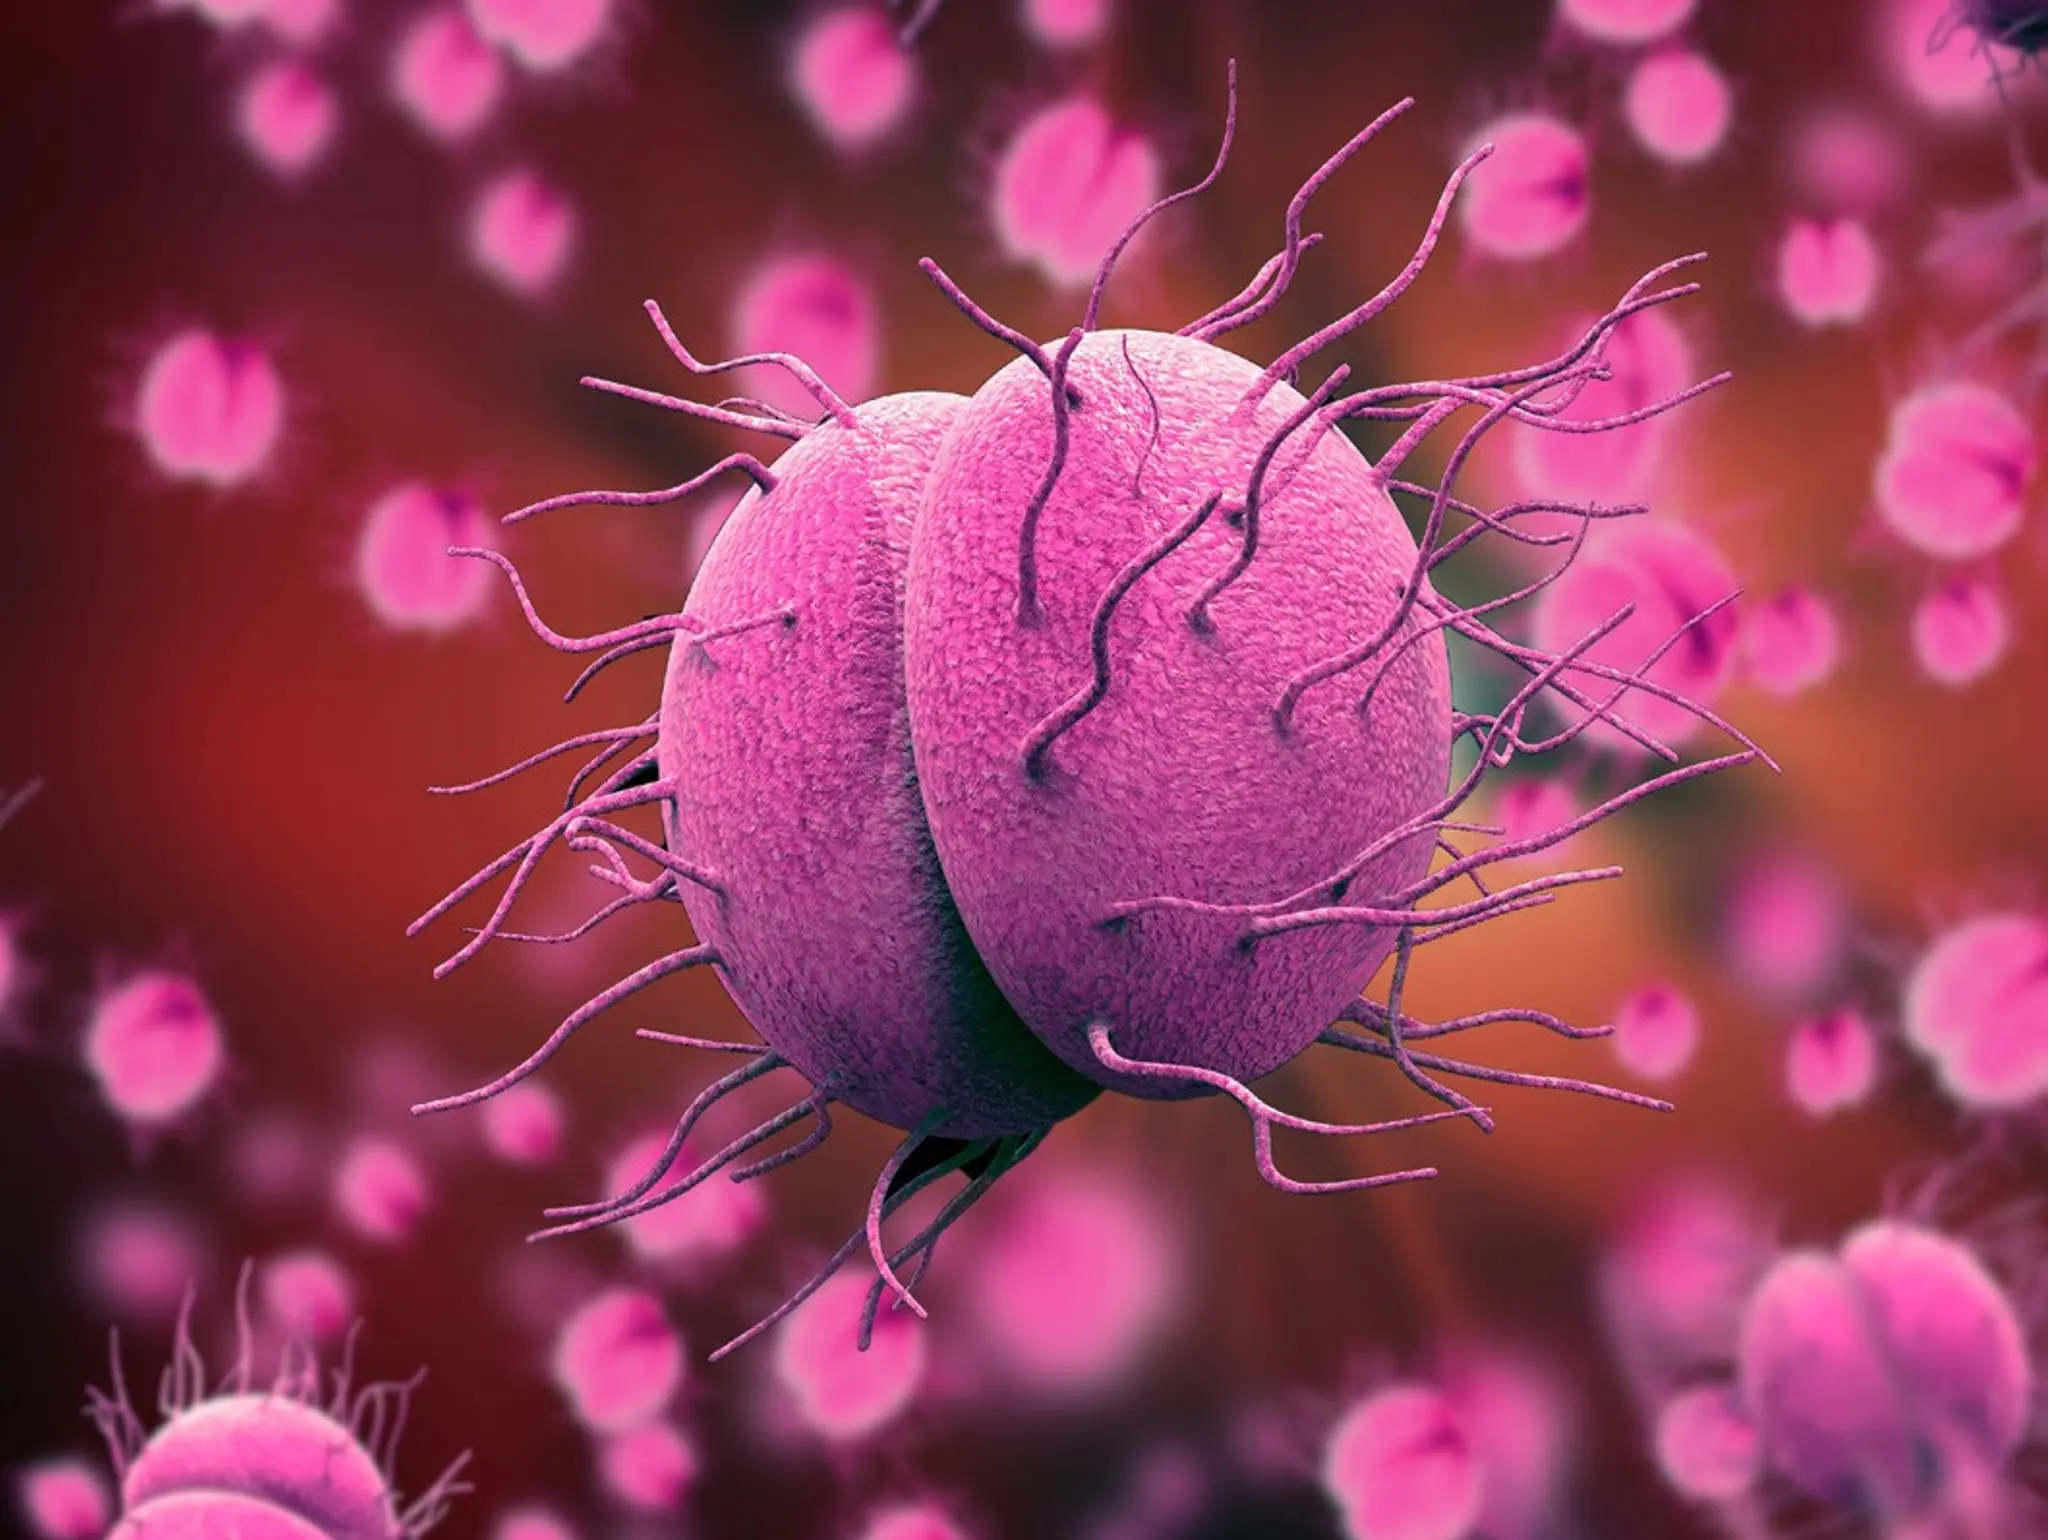 GSK announces results from phase 3 gonorrhoea treatment trial